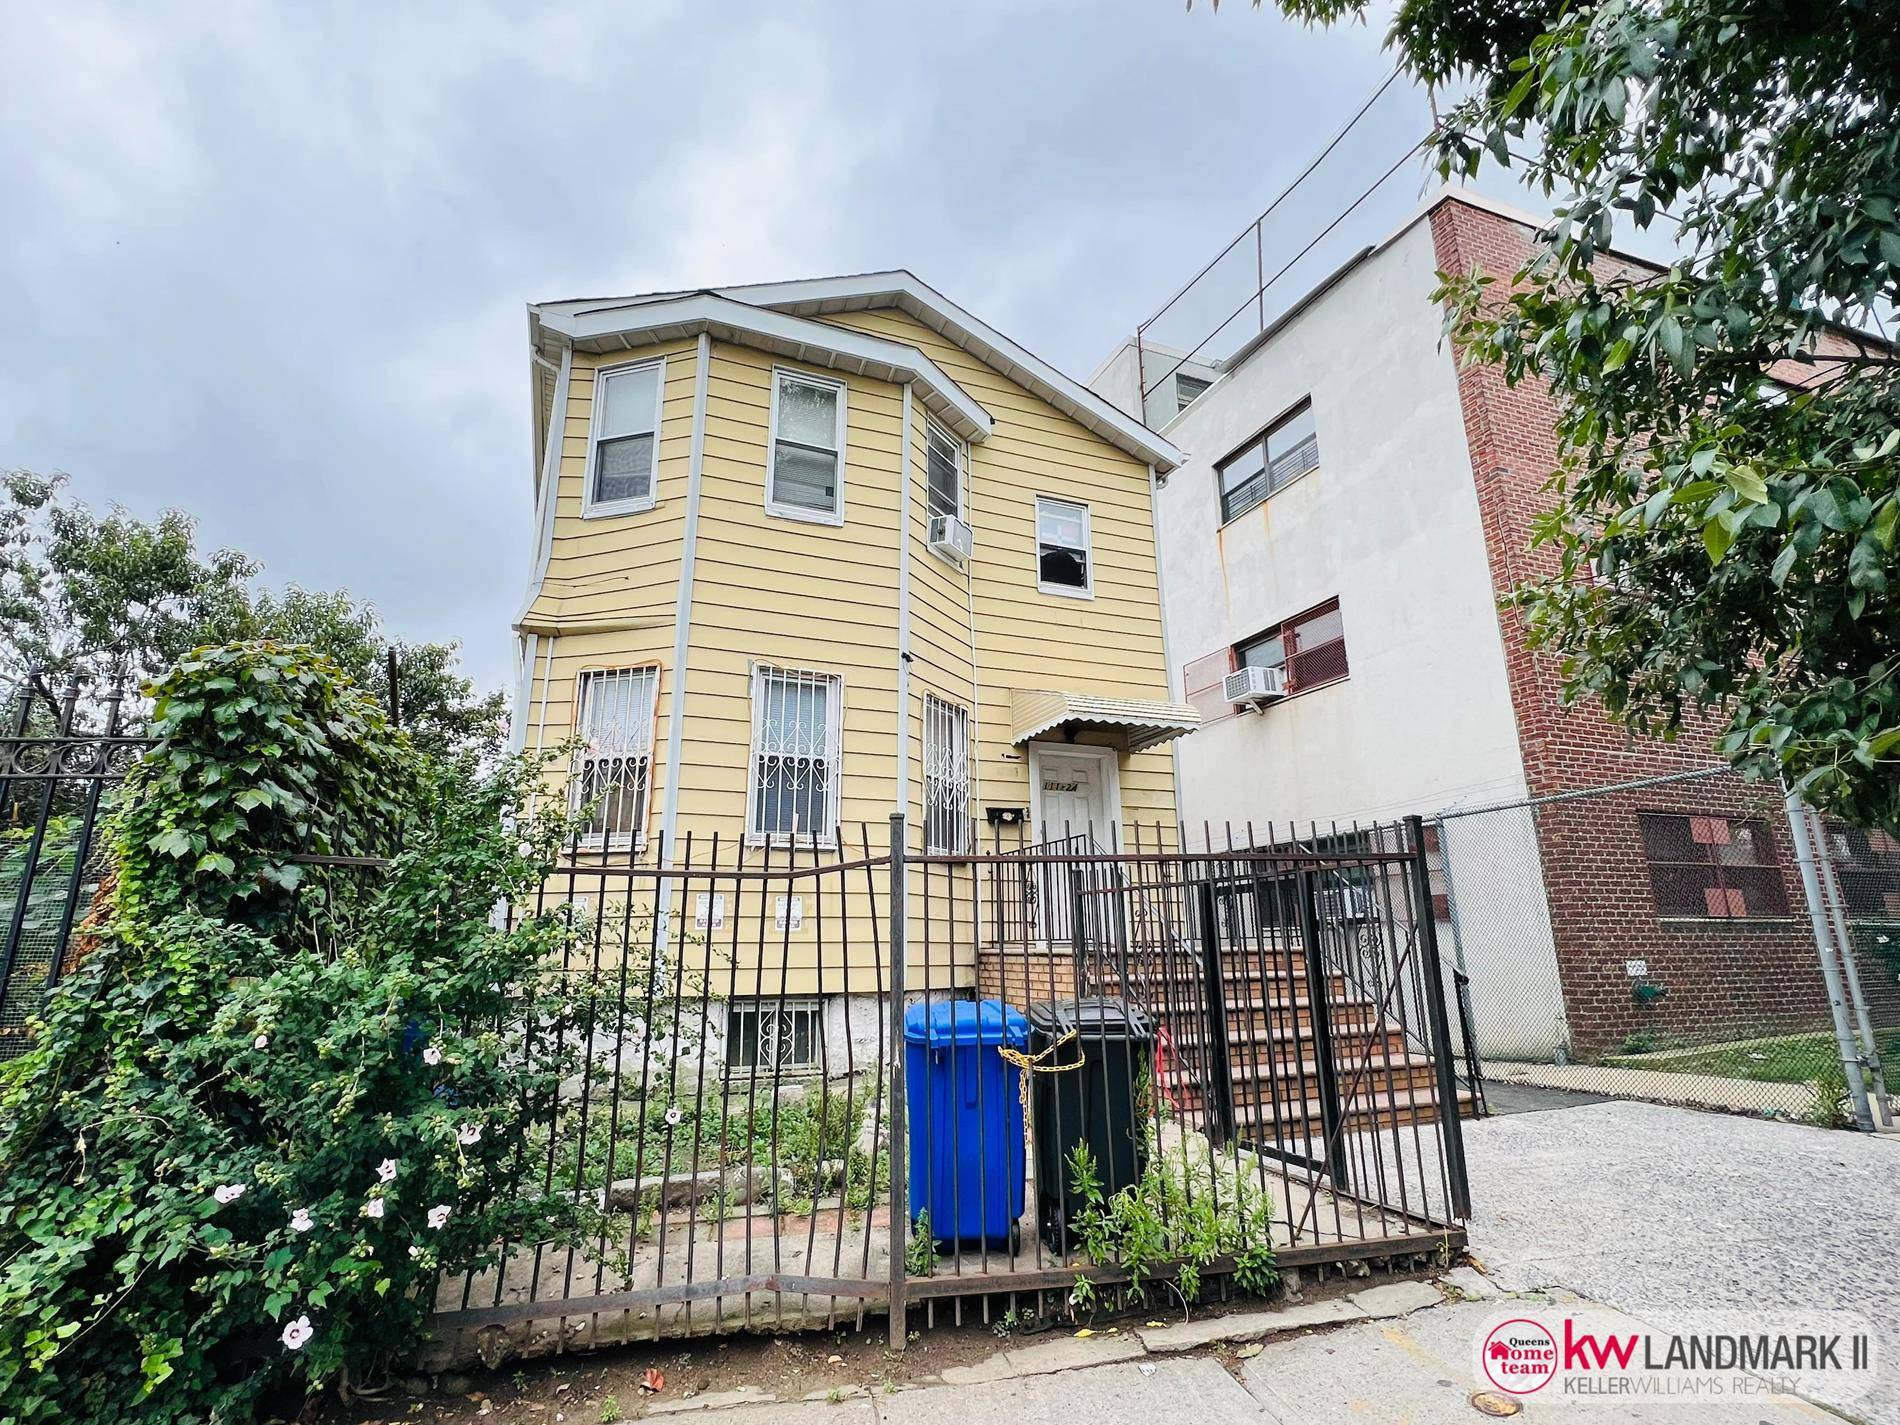 Fully detached 2 family with R6A zoning in prime location of Corona, Queens.